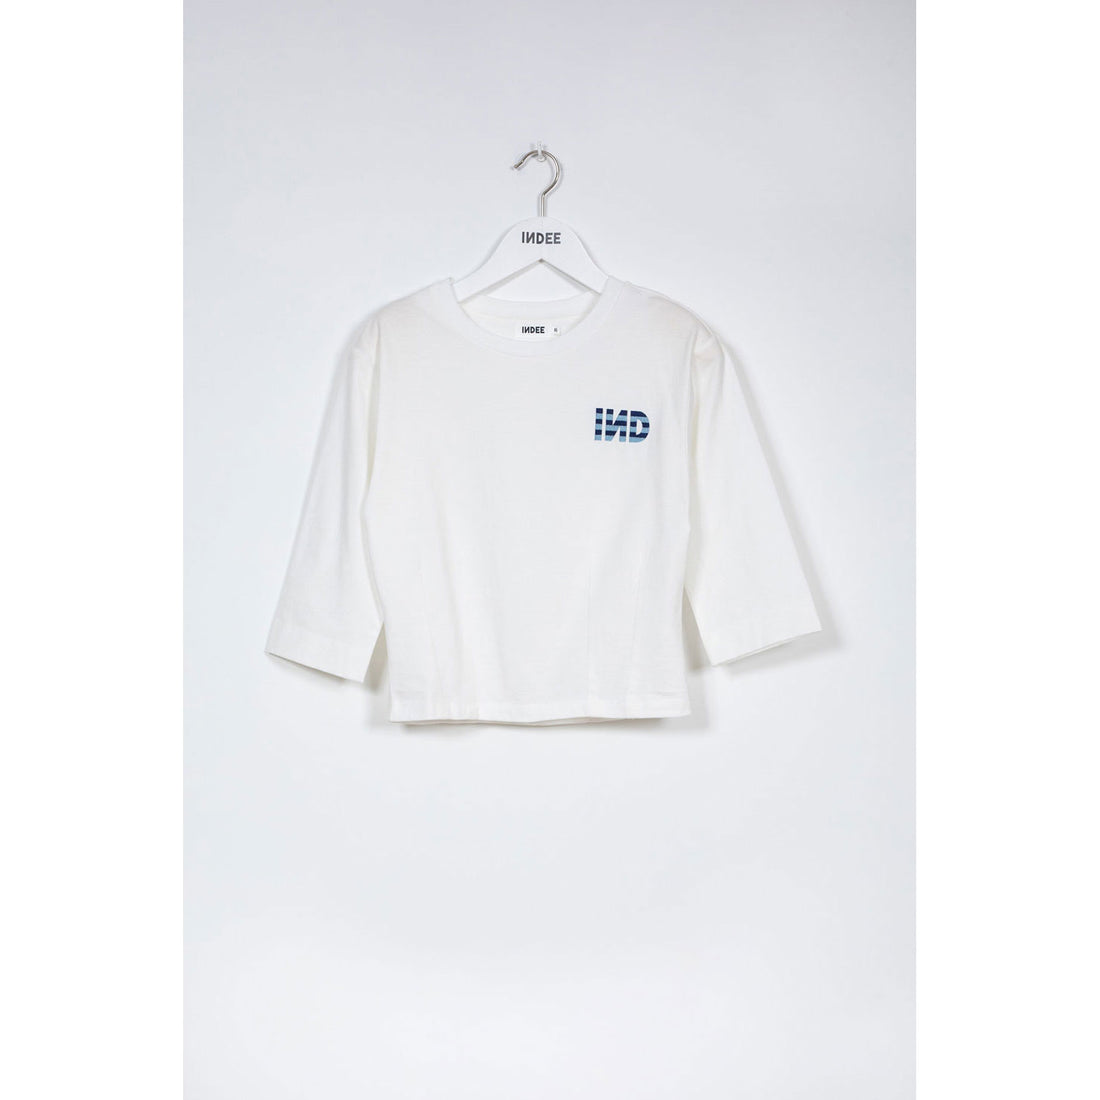 Indee Off White IND Longsleeve Tee